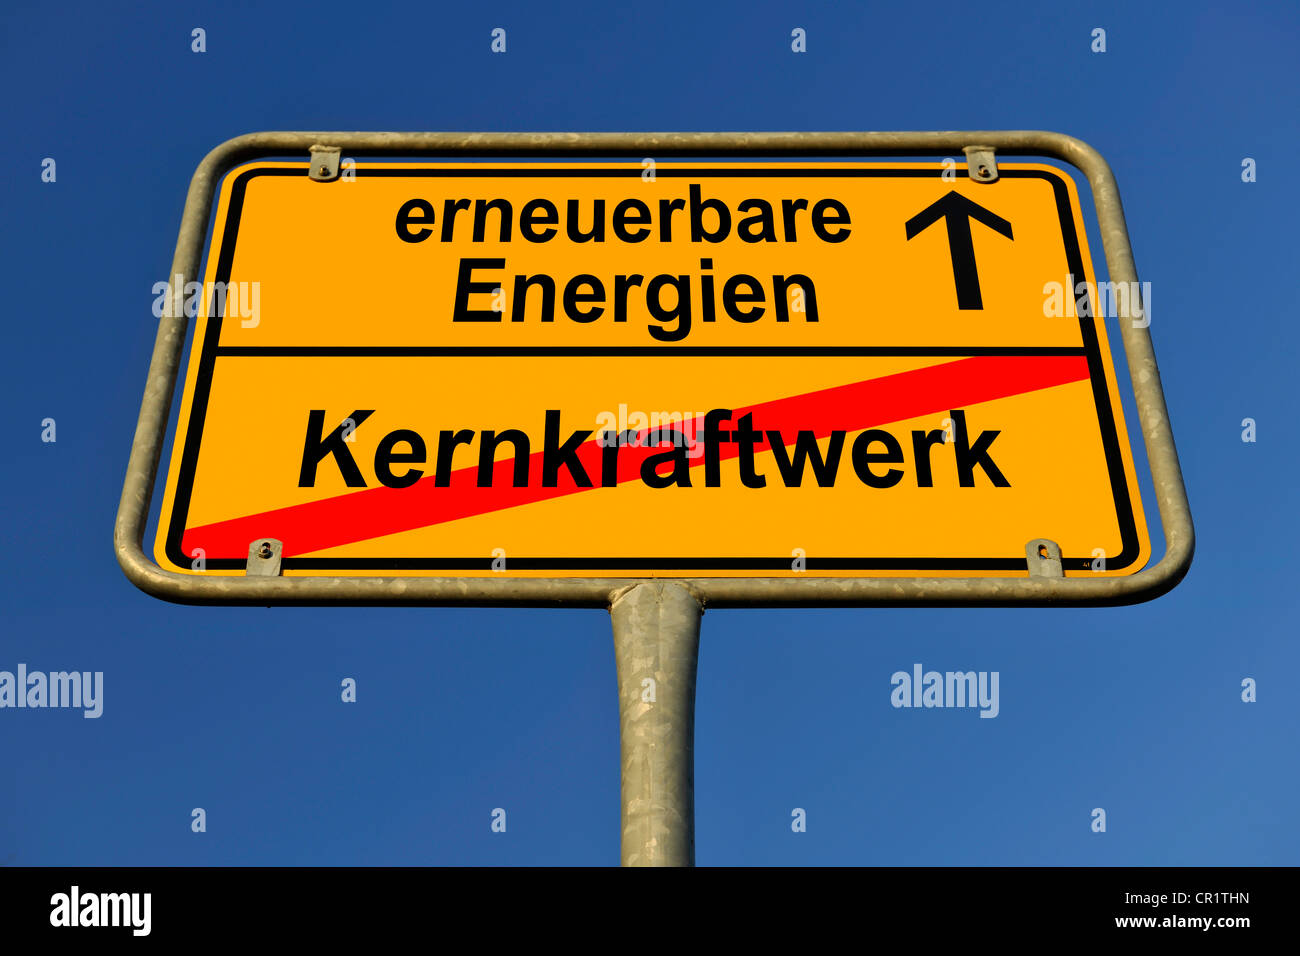 City limits sign with the words erneuerbare Energien and Kernkraftwerk, German for renewable energy and nuclear power station, Stock Photo